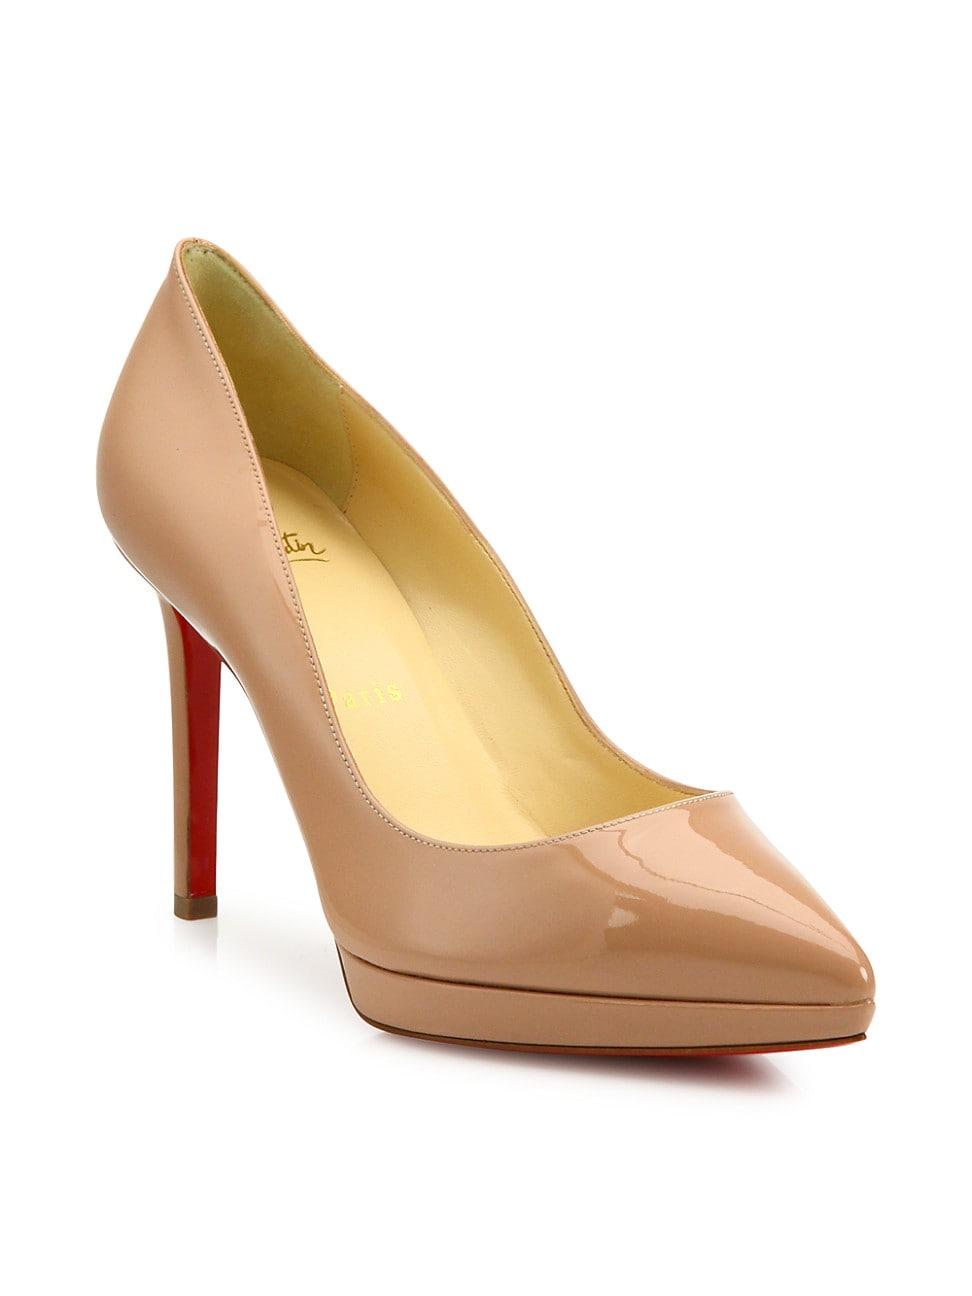 Christian Louboutin Pigalle Plato Leather Platform in Nude (Natural) - Lyst